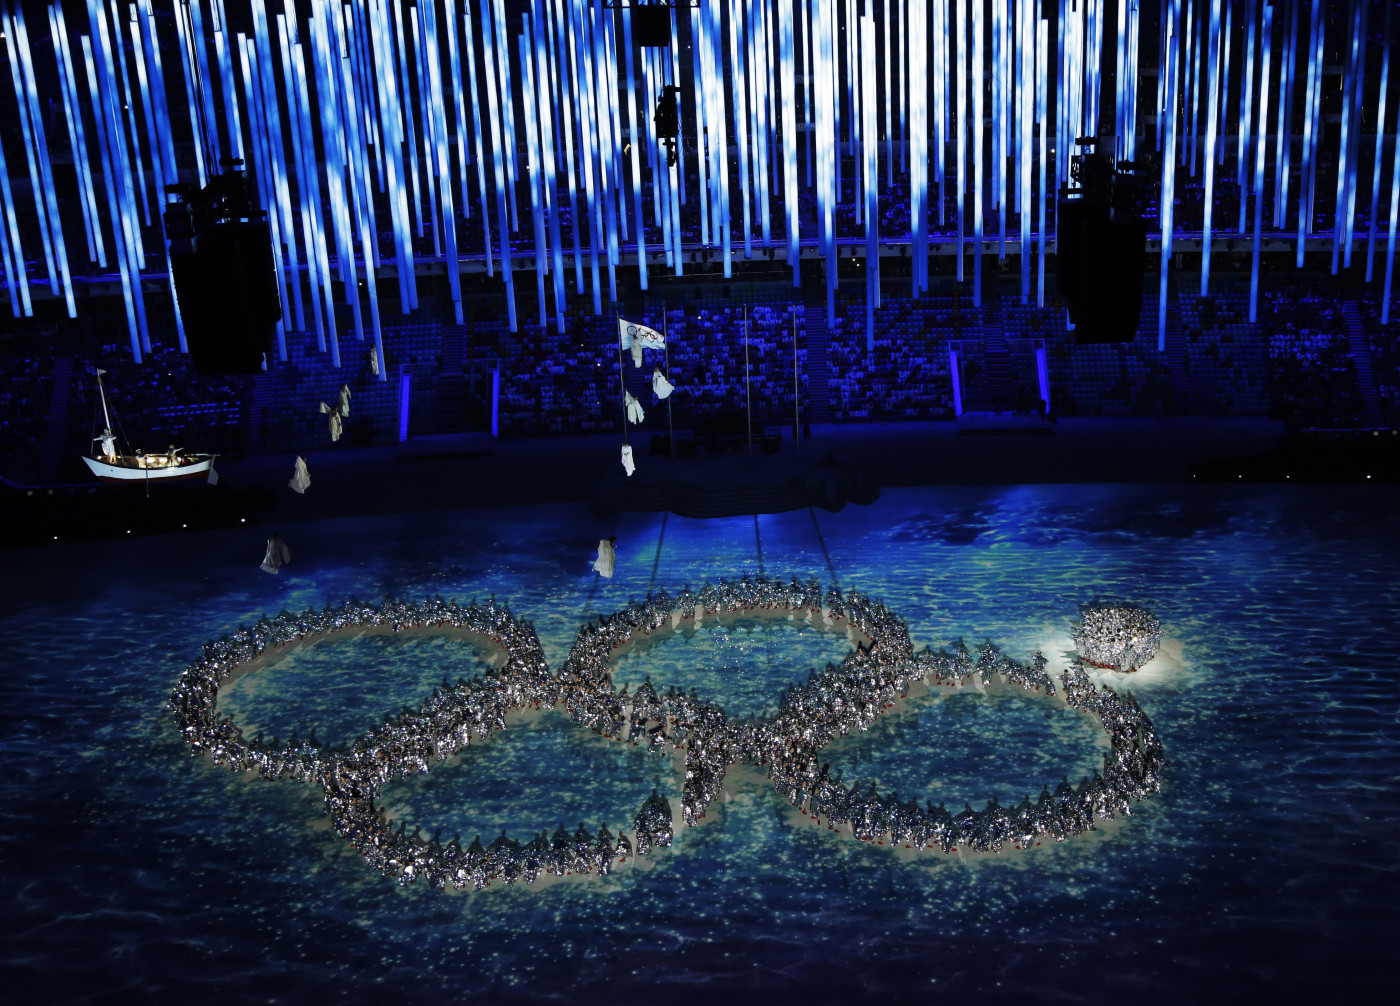 Performers recreate the fifth Olympic ring that didn't open in the opening ceremony during the closing ceremony of the 2014 Winter Olympics, Sunday, Feb. 23, 2014, in Sochi, Russia.